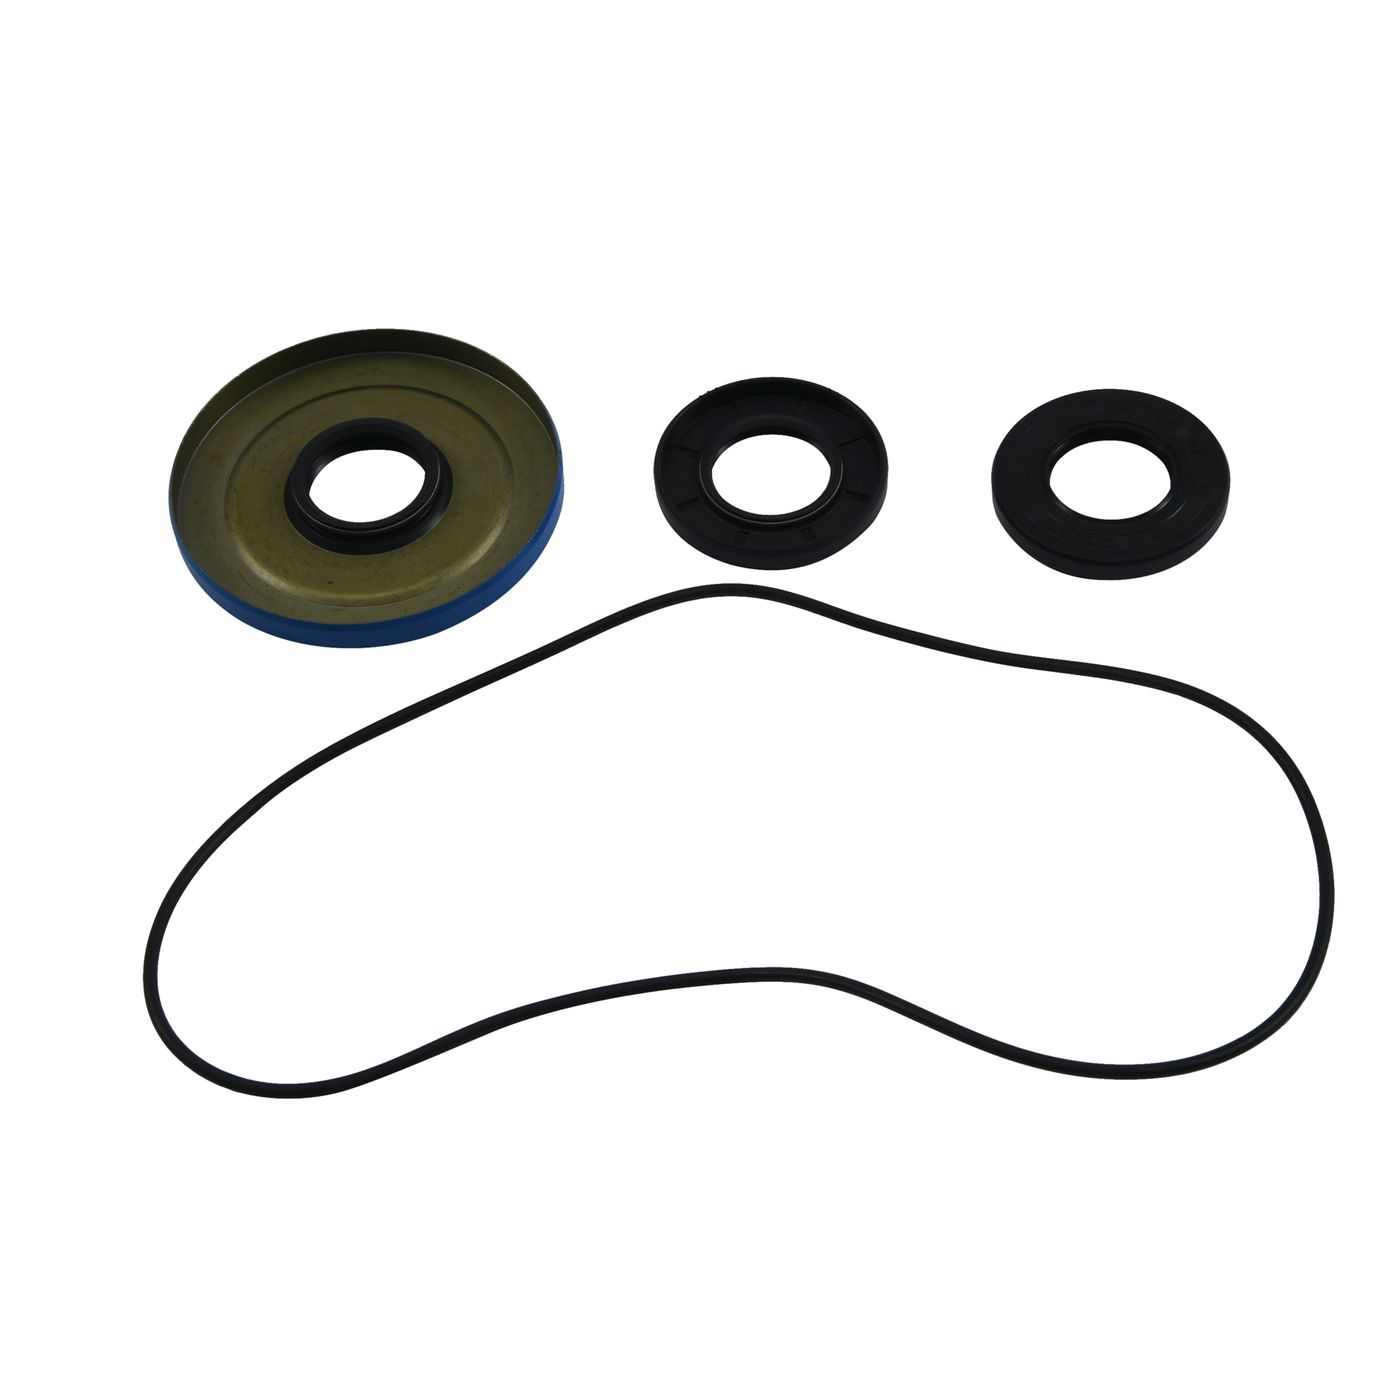 Wrp Diff Seal Kits - WRP252117-5 image